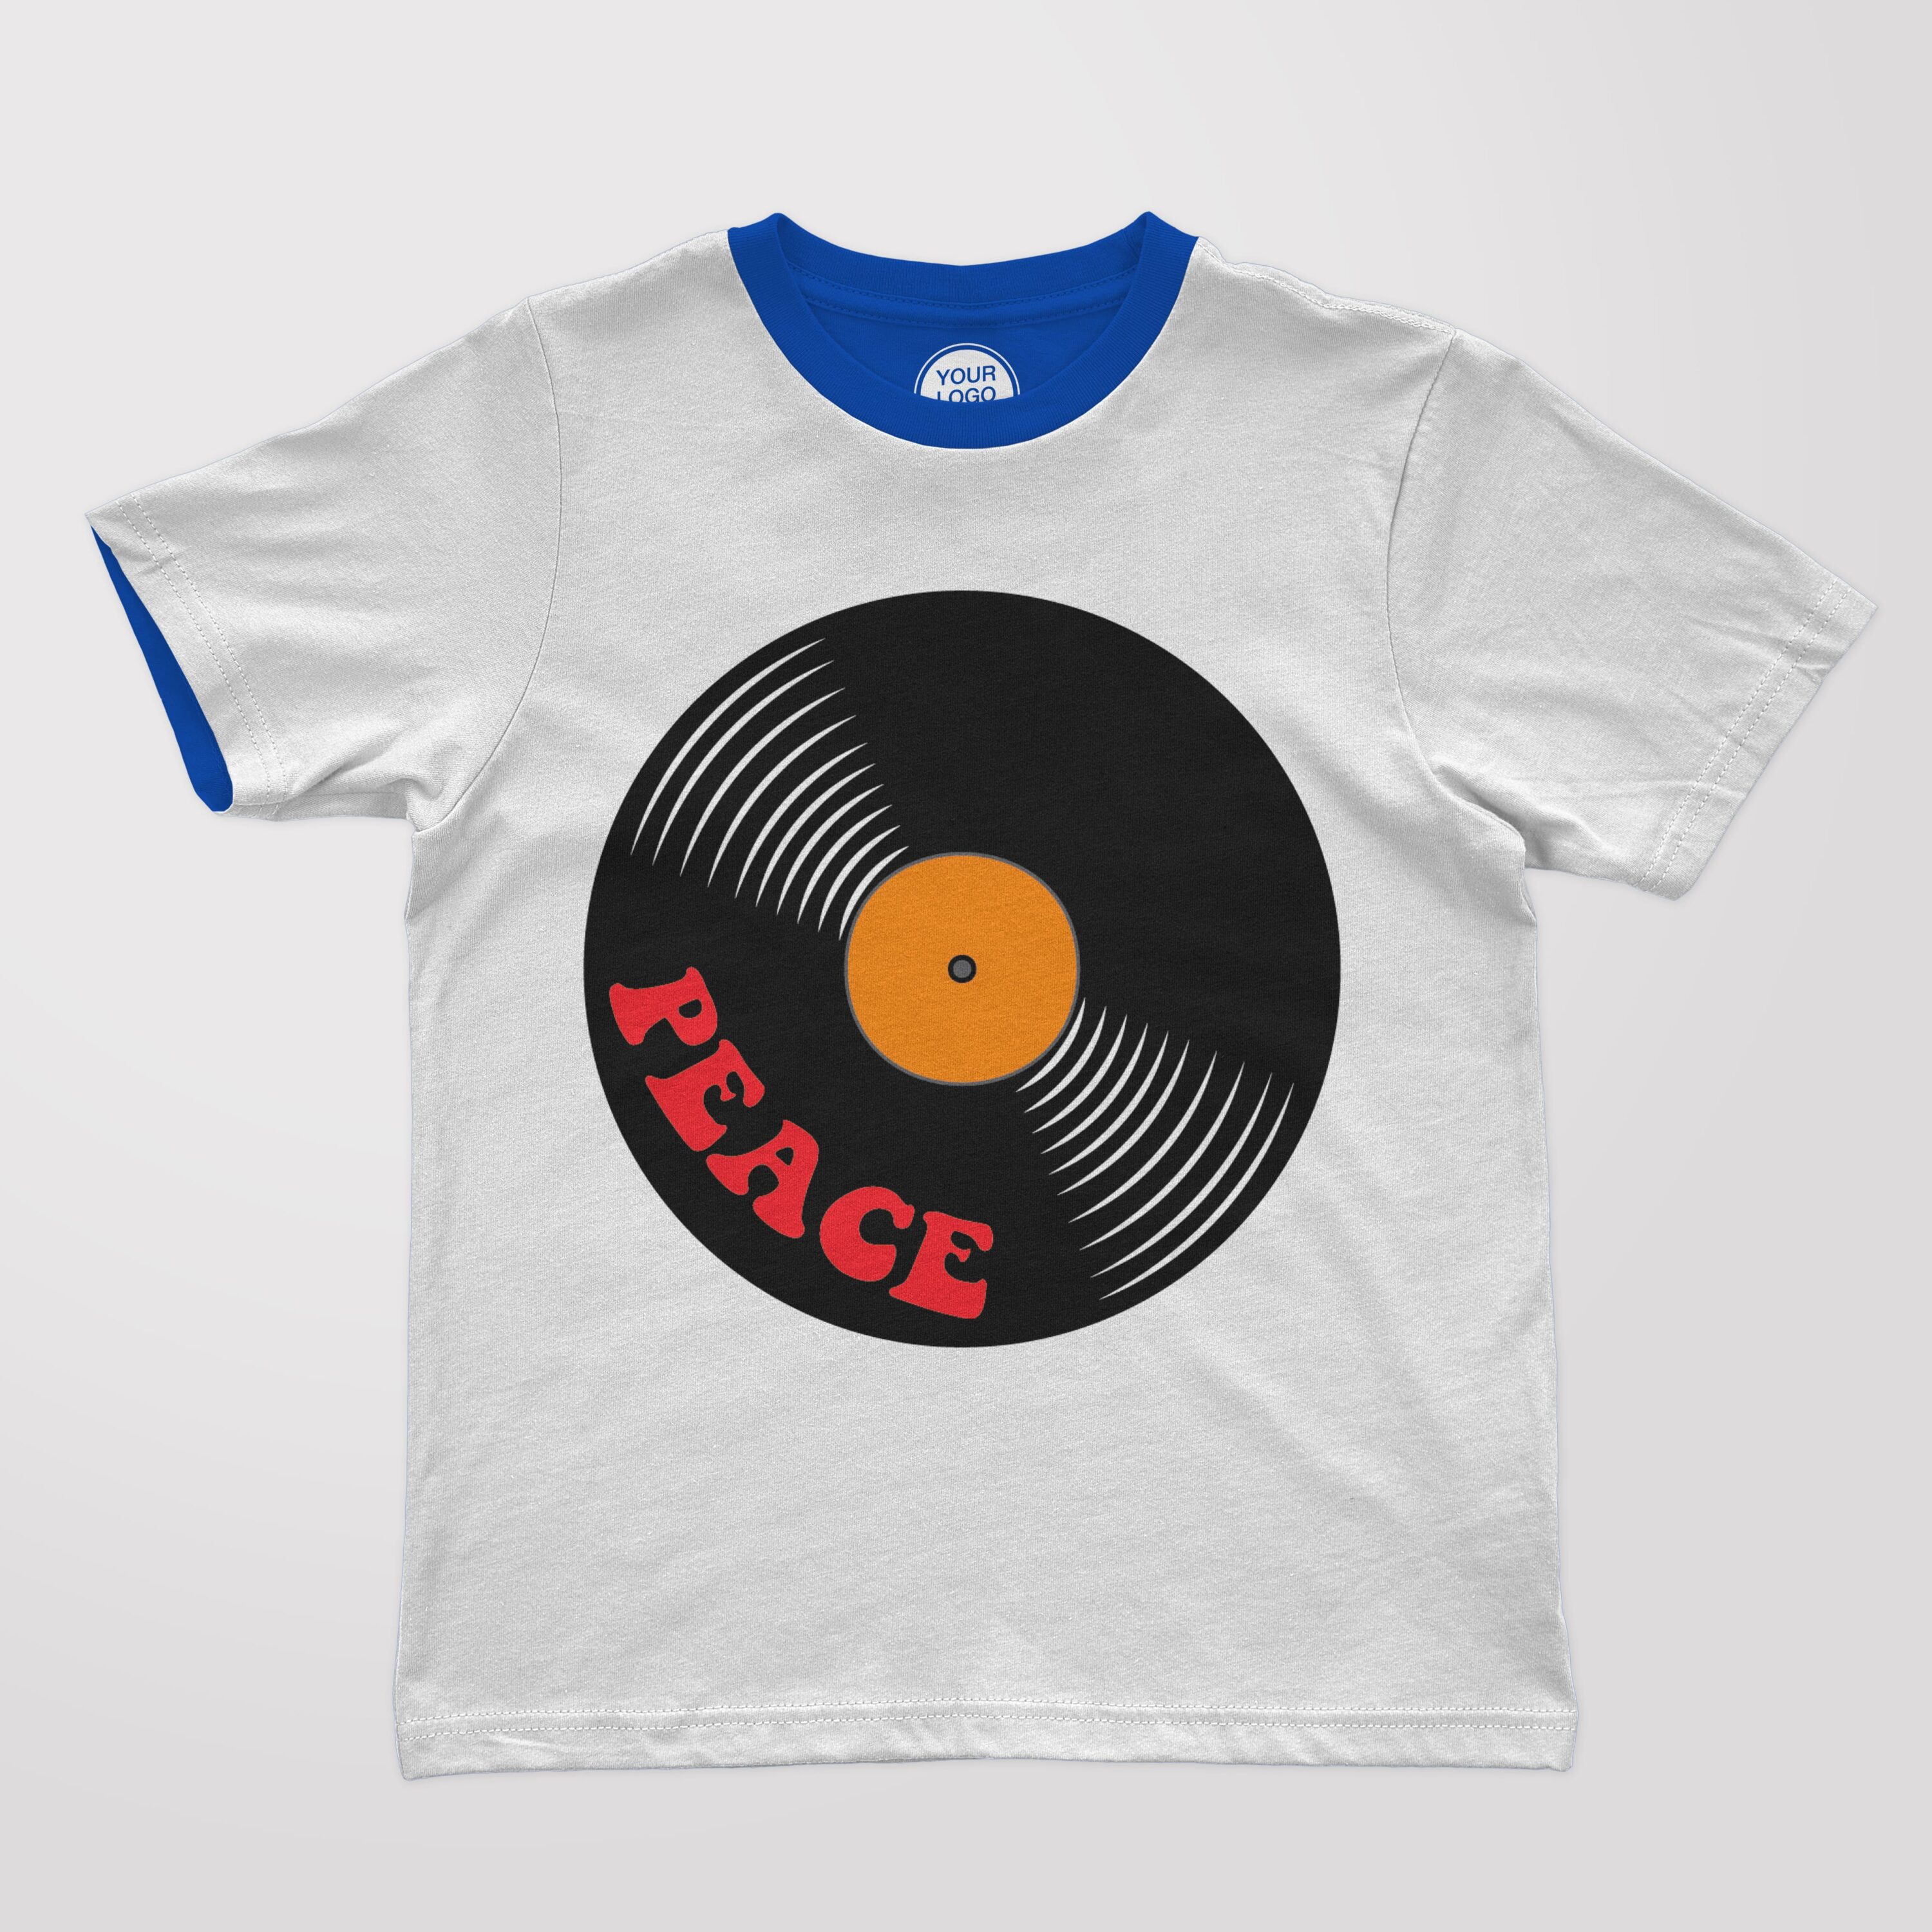 T-shirt design with printed peace vinyl on it.